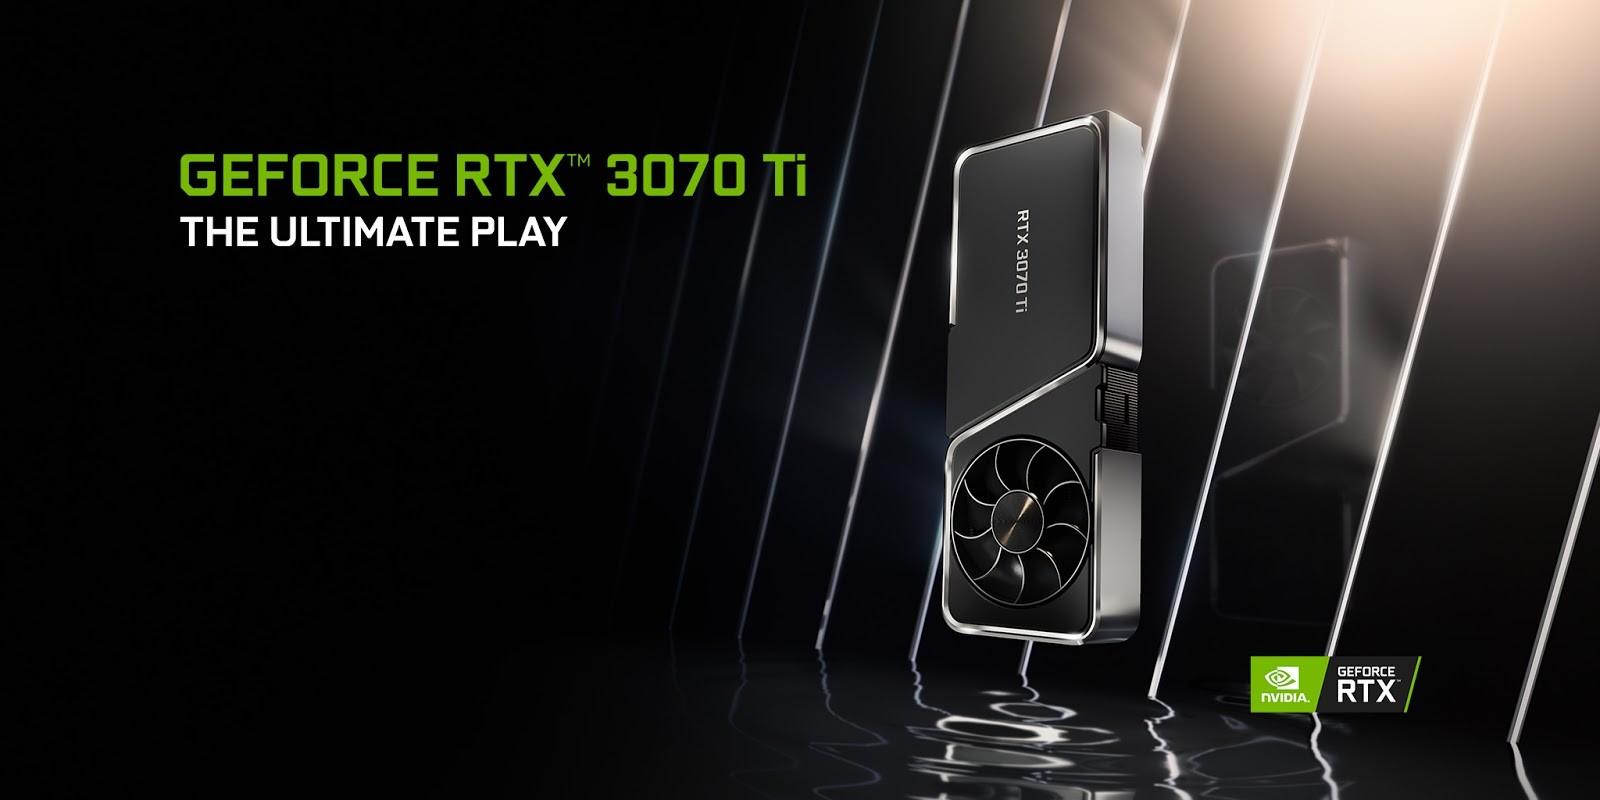 EXPERIENCE THE NVIDIA GEFORCE RTX 3070 Ti IN A FULLY LIQUID-COOLED EK FLUID GAMING PC